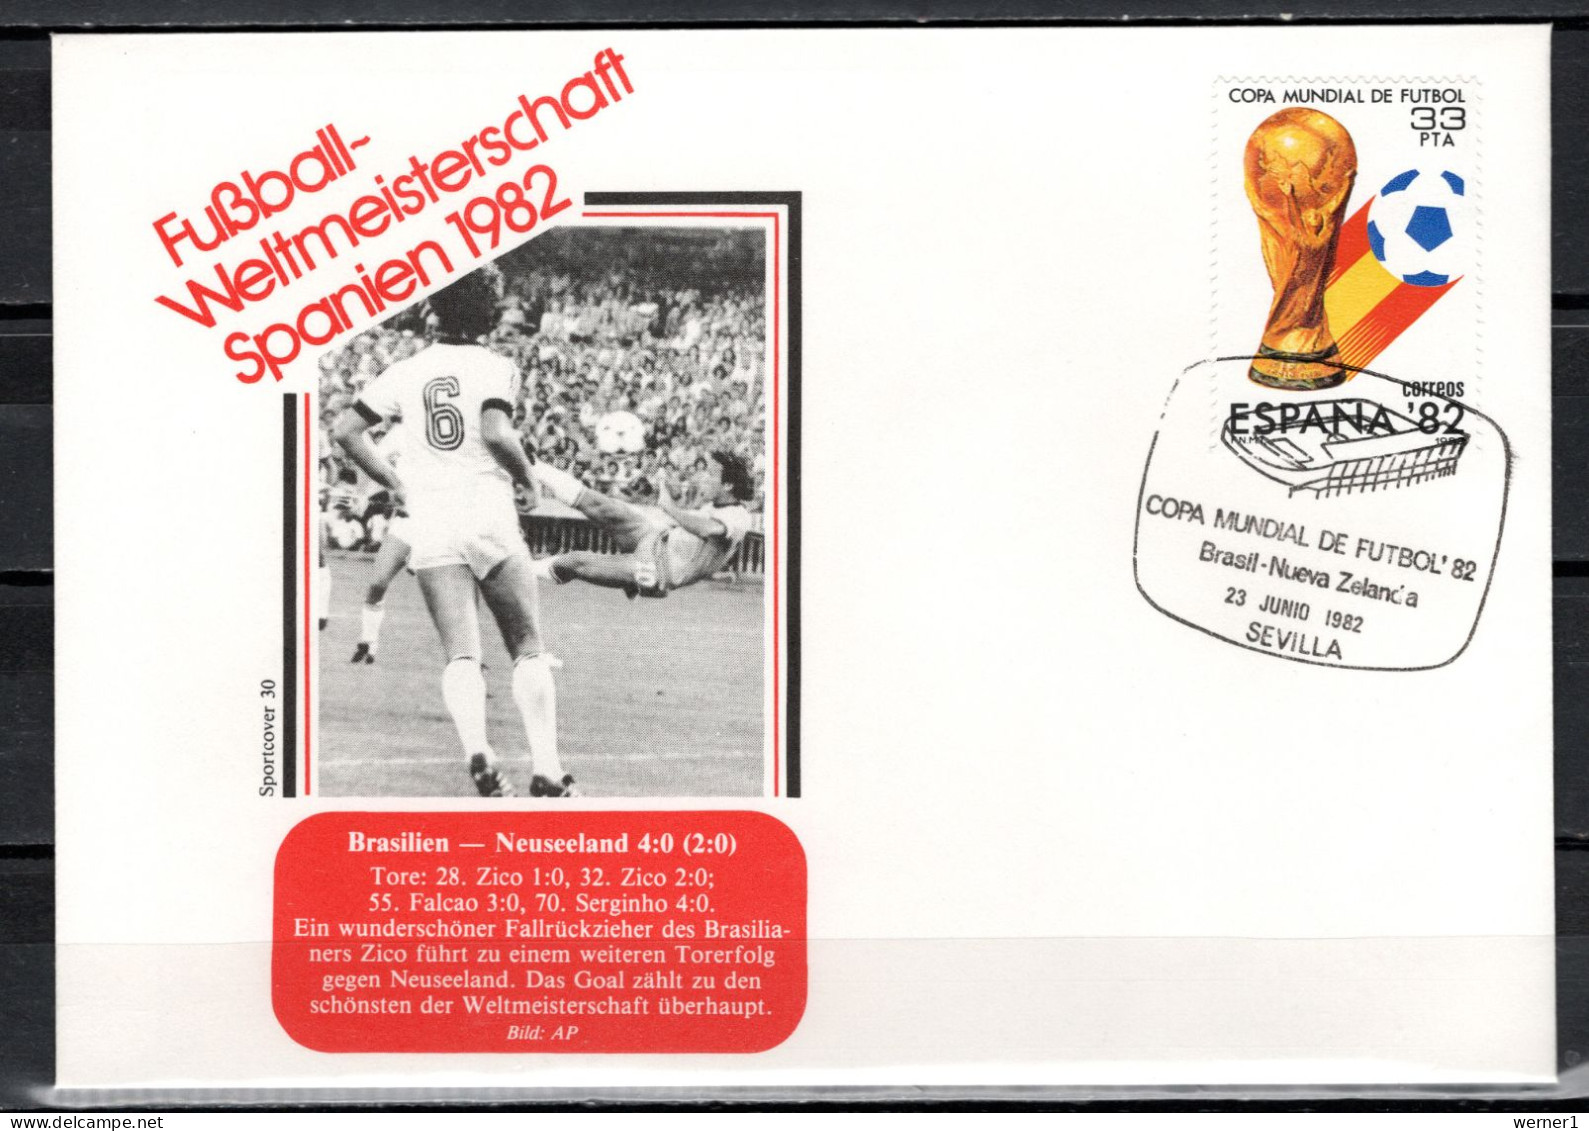 Spain 1982 Football Soccer World Cup Commemorative Cover Match Brazil - New Zealand 4:0 - 1982 – Spain